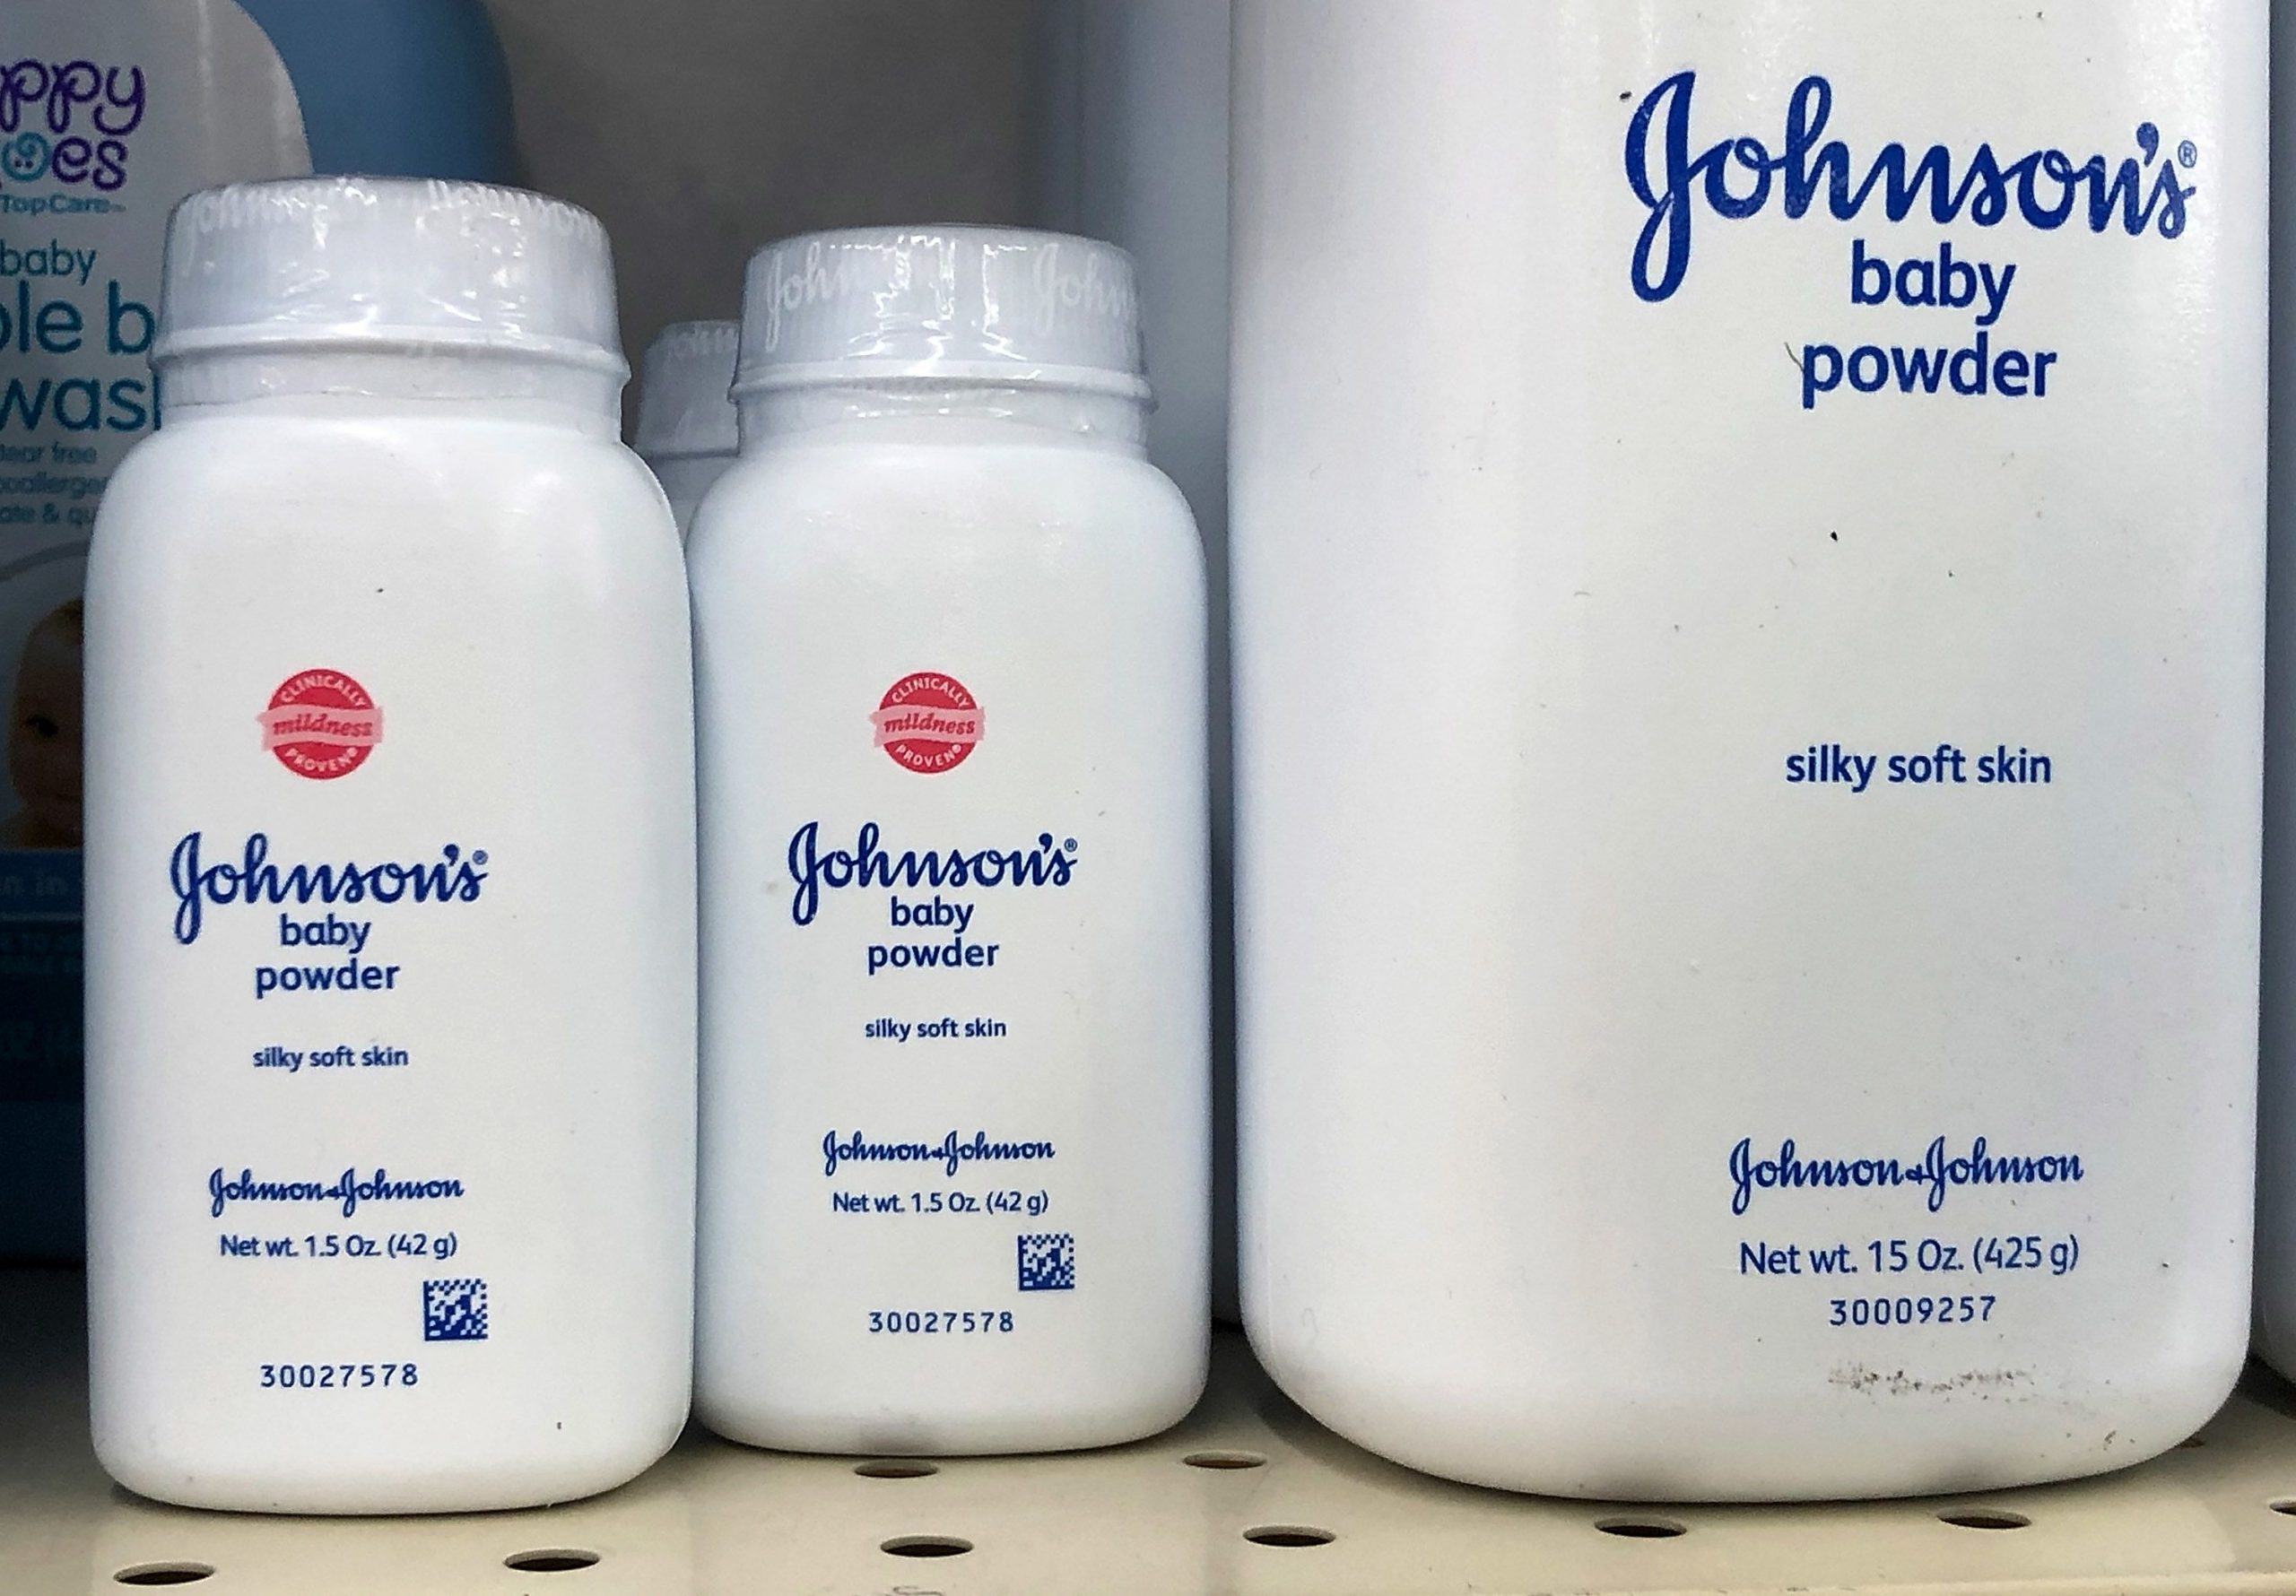 Johnson & Johnson offers $9bn to settle talc claims